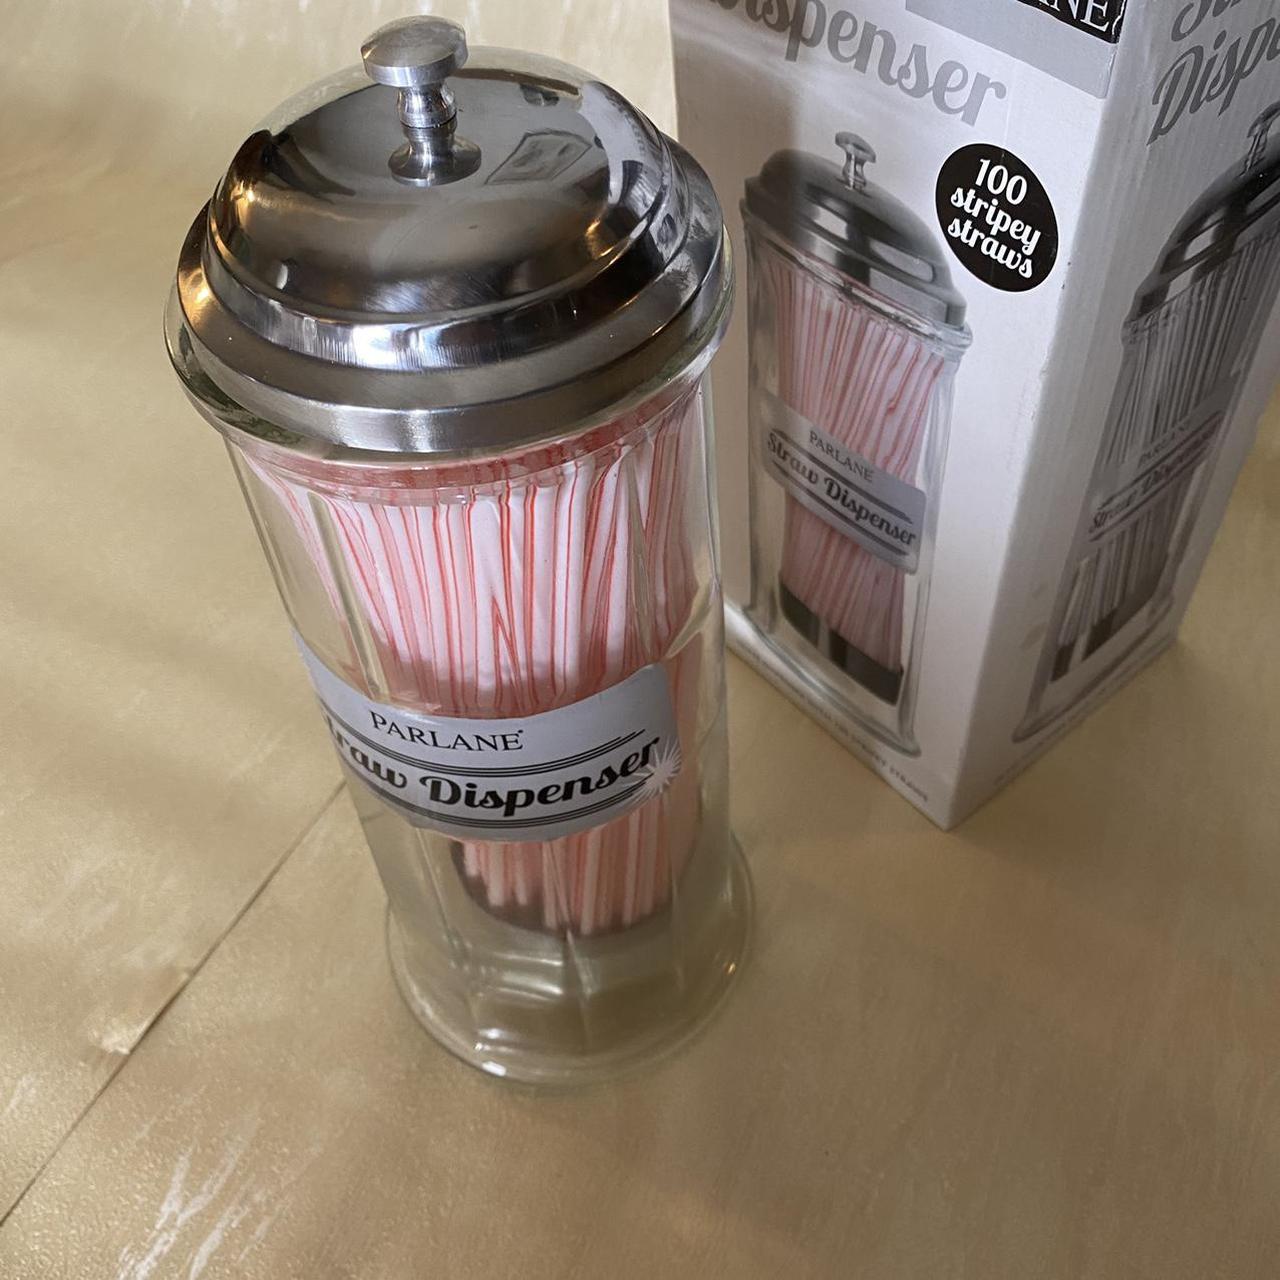 Product Image 3 - 🎄 Christmas Gifts 🎄

Straw dispenser.